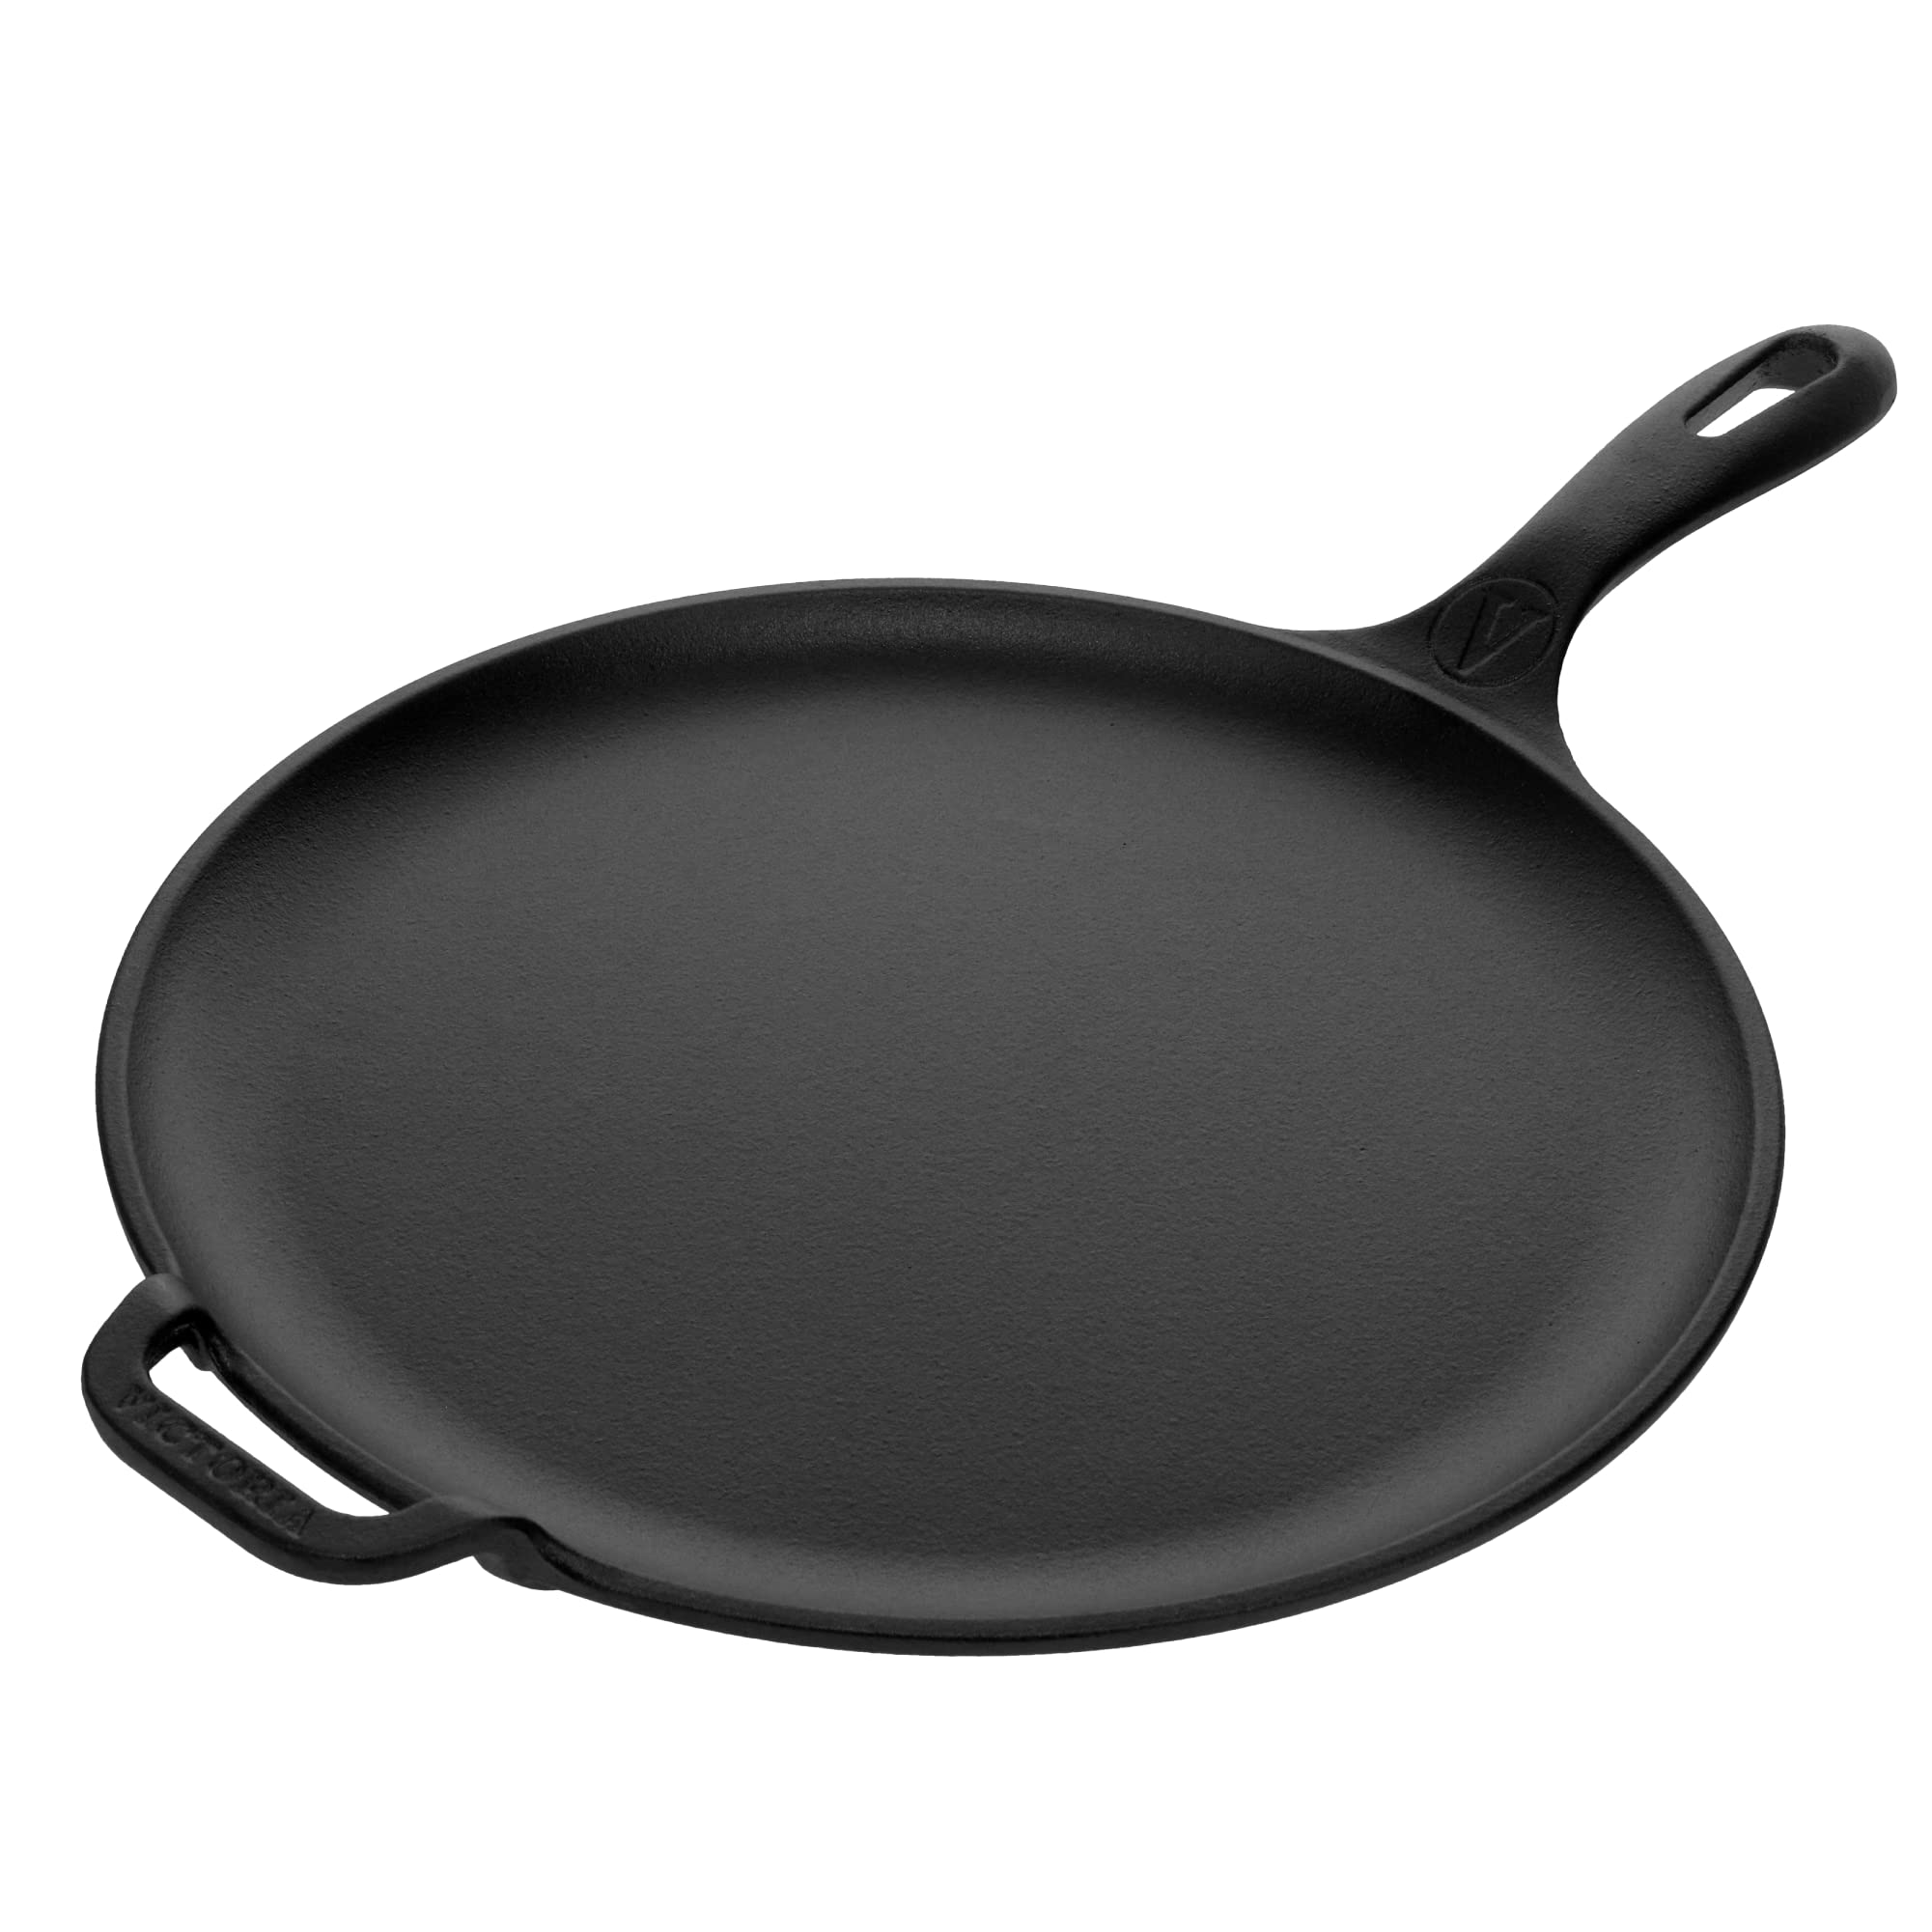 Victoria 12-Inch Cast Iron Comal Pizza Pan with a Long Handle and a Loop Handle, Preseasoned with Flaxseed Oil, Made in Colombia